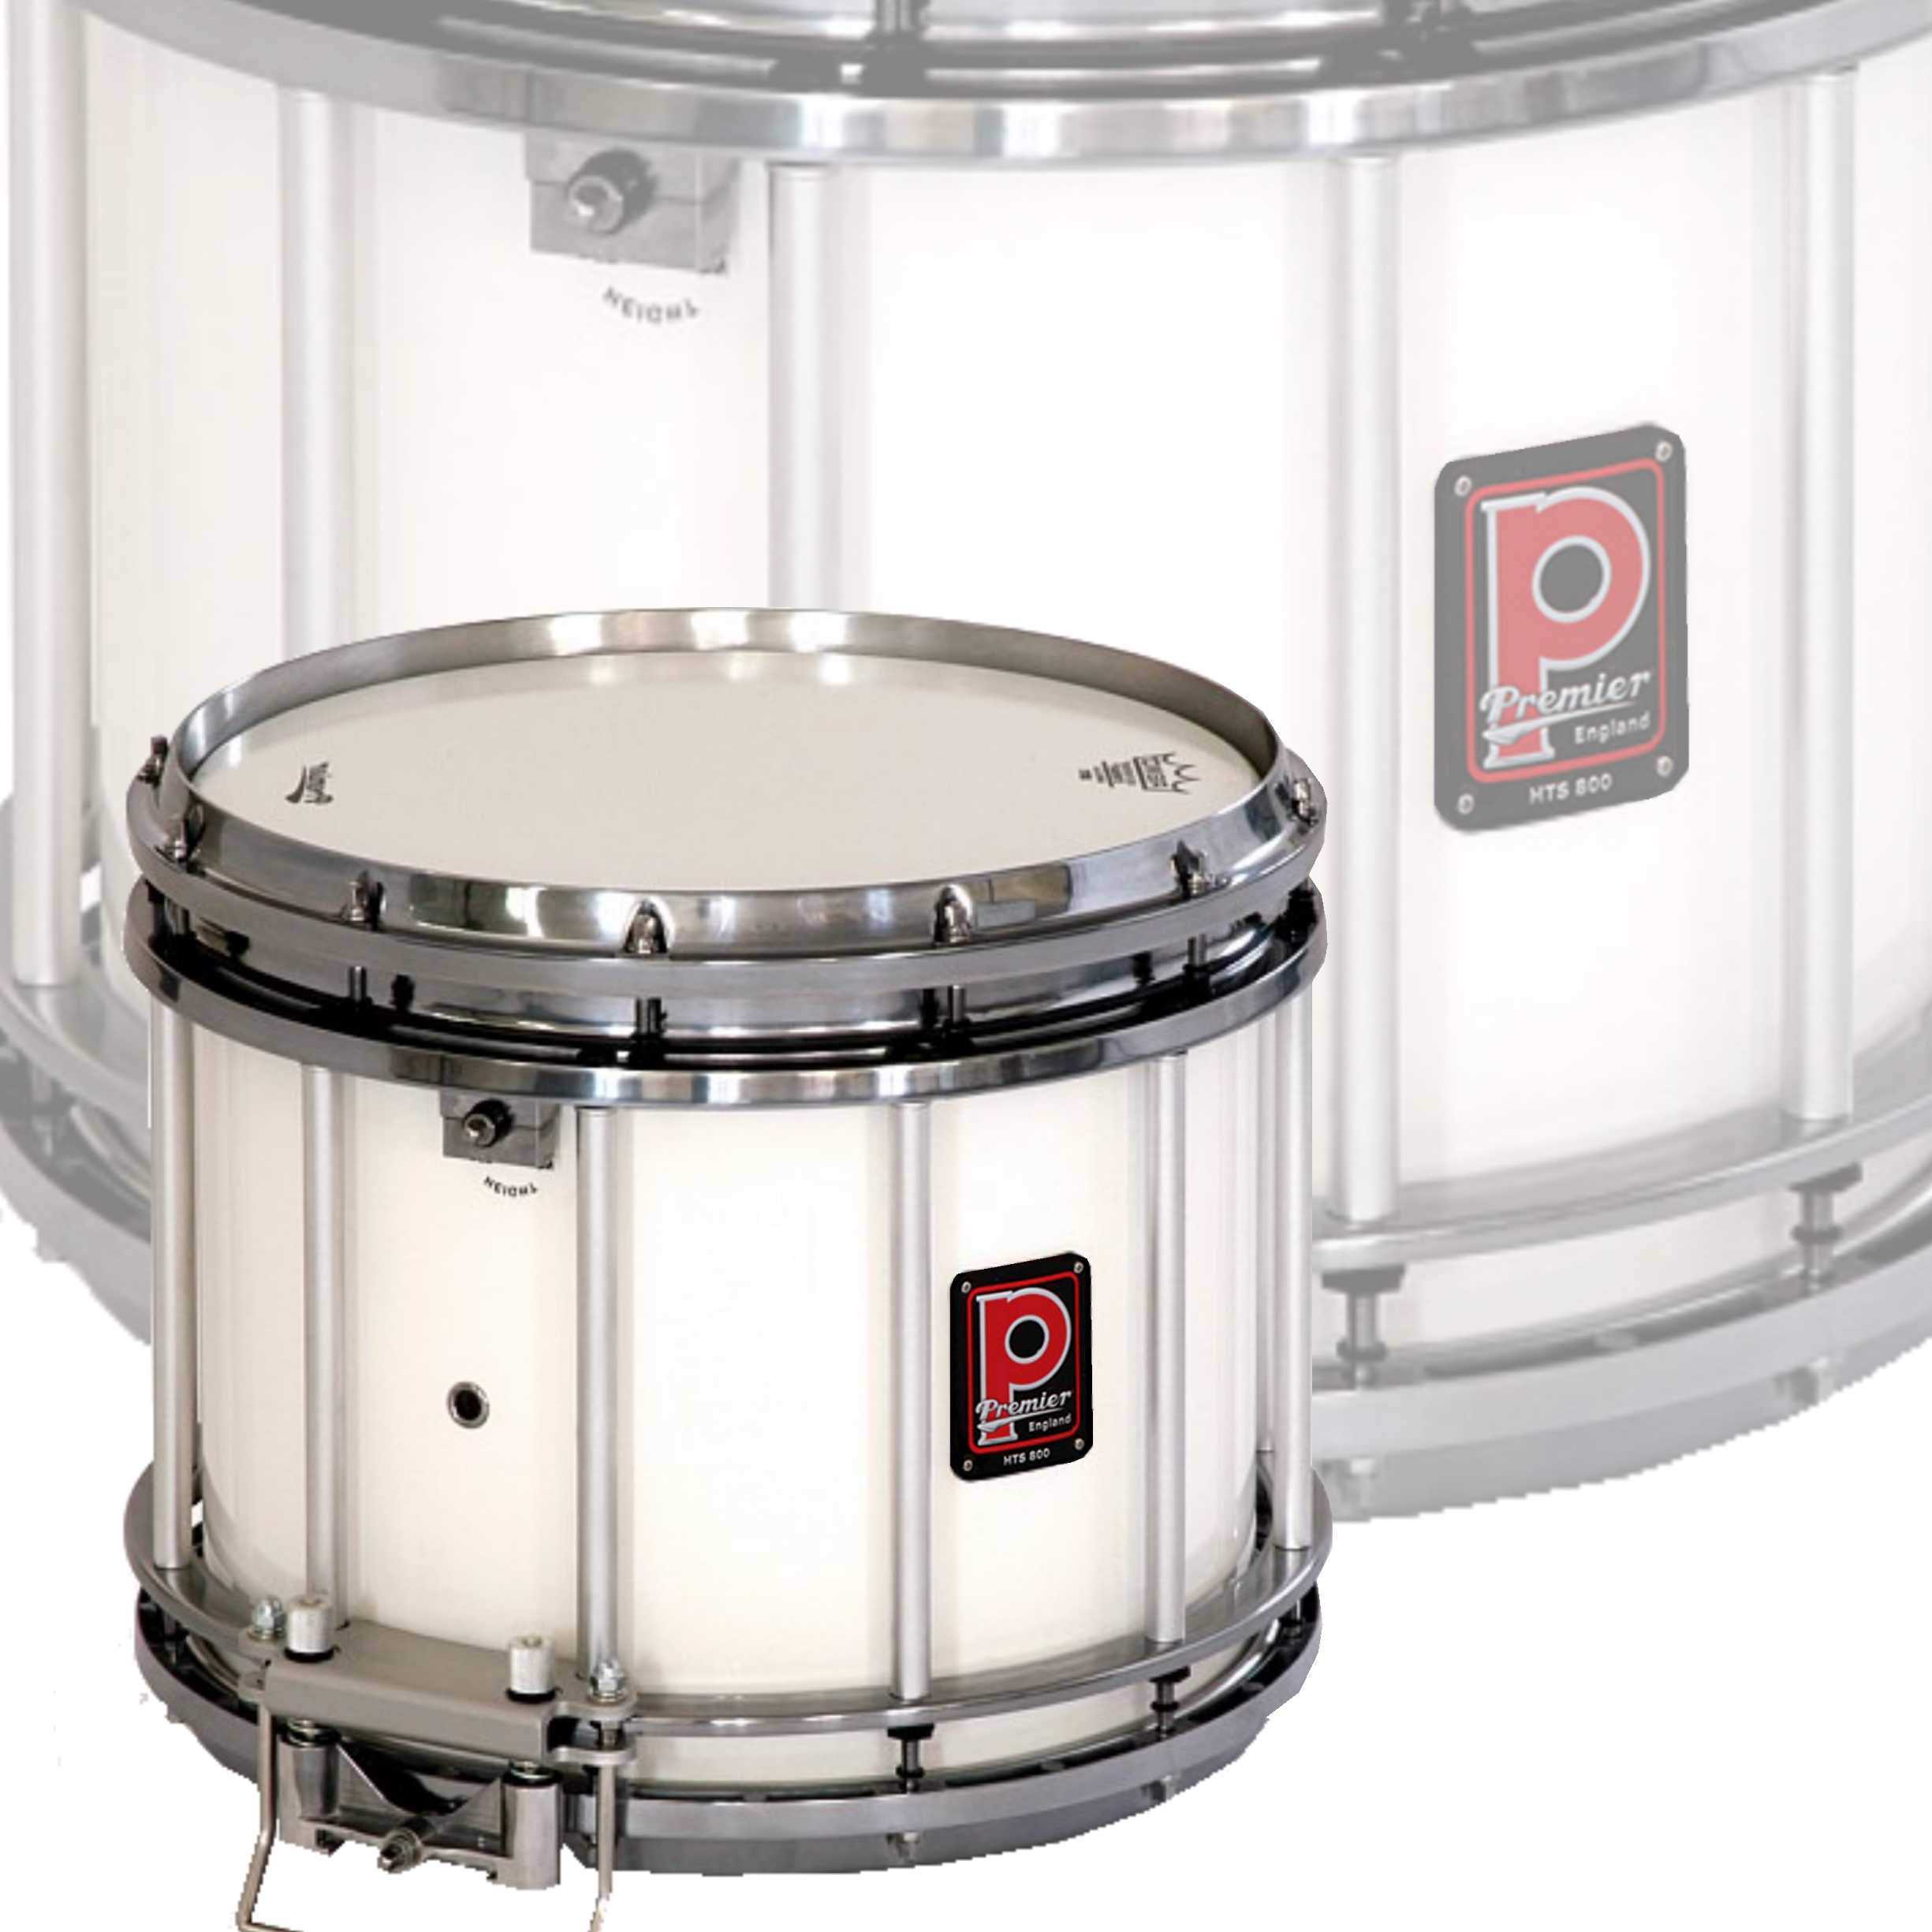 Premier Pipe Band HTS-0800-IWC 14"x12" Side Snare Drum Ivory White Lacquer